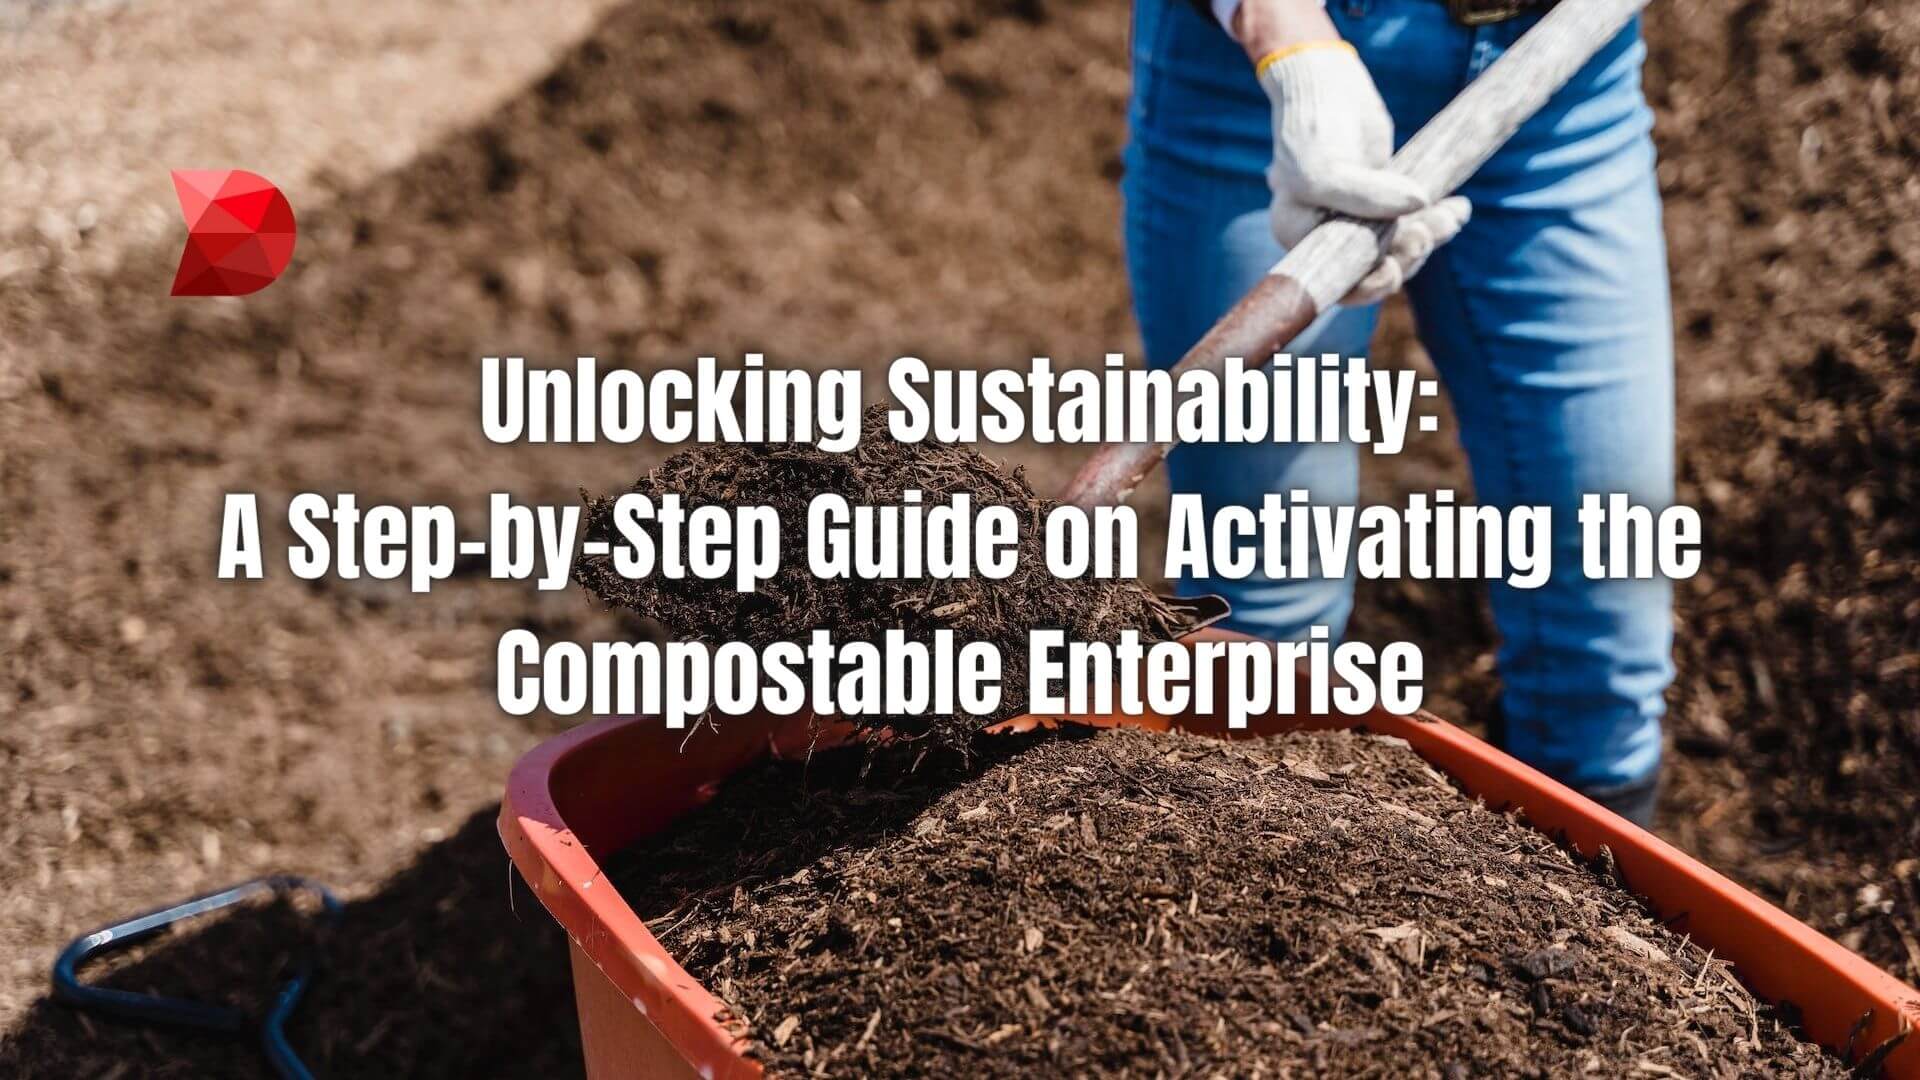 Discover strategies for a sustainable business. Click here to unveil the steps to activate a compostable enterprise.